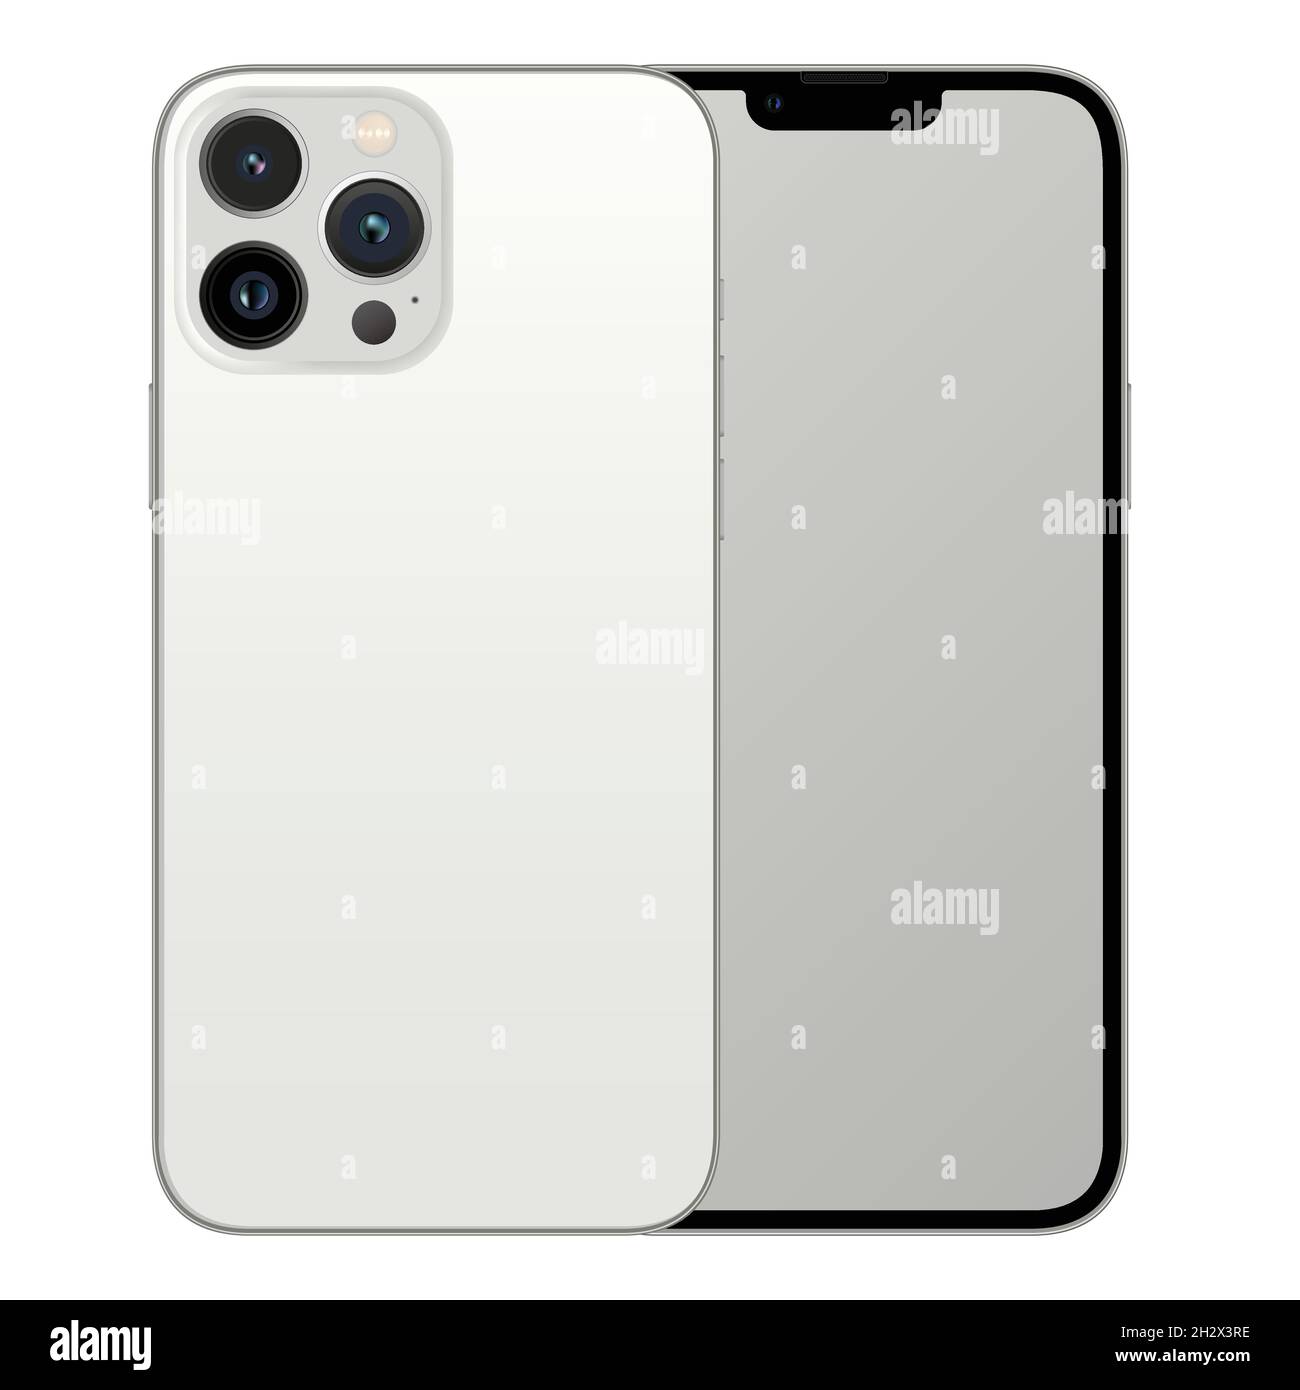 New model iphone 13 pro max silver, front and back design smartphone, flat design mobile phone vector stock illustration Stock Vector